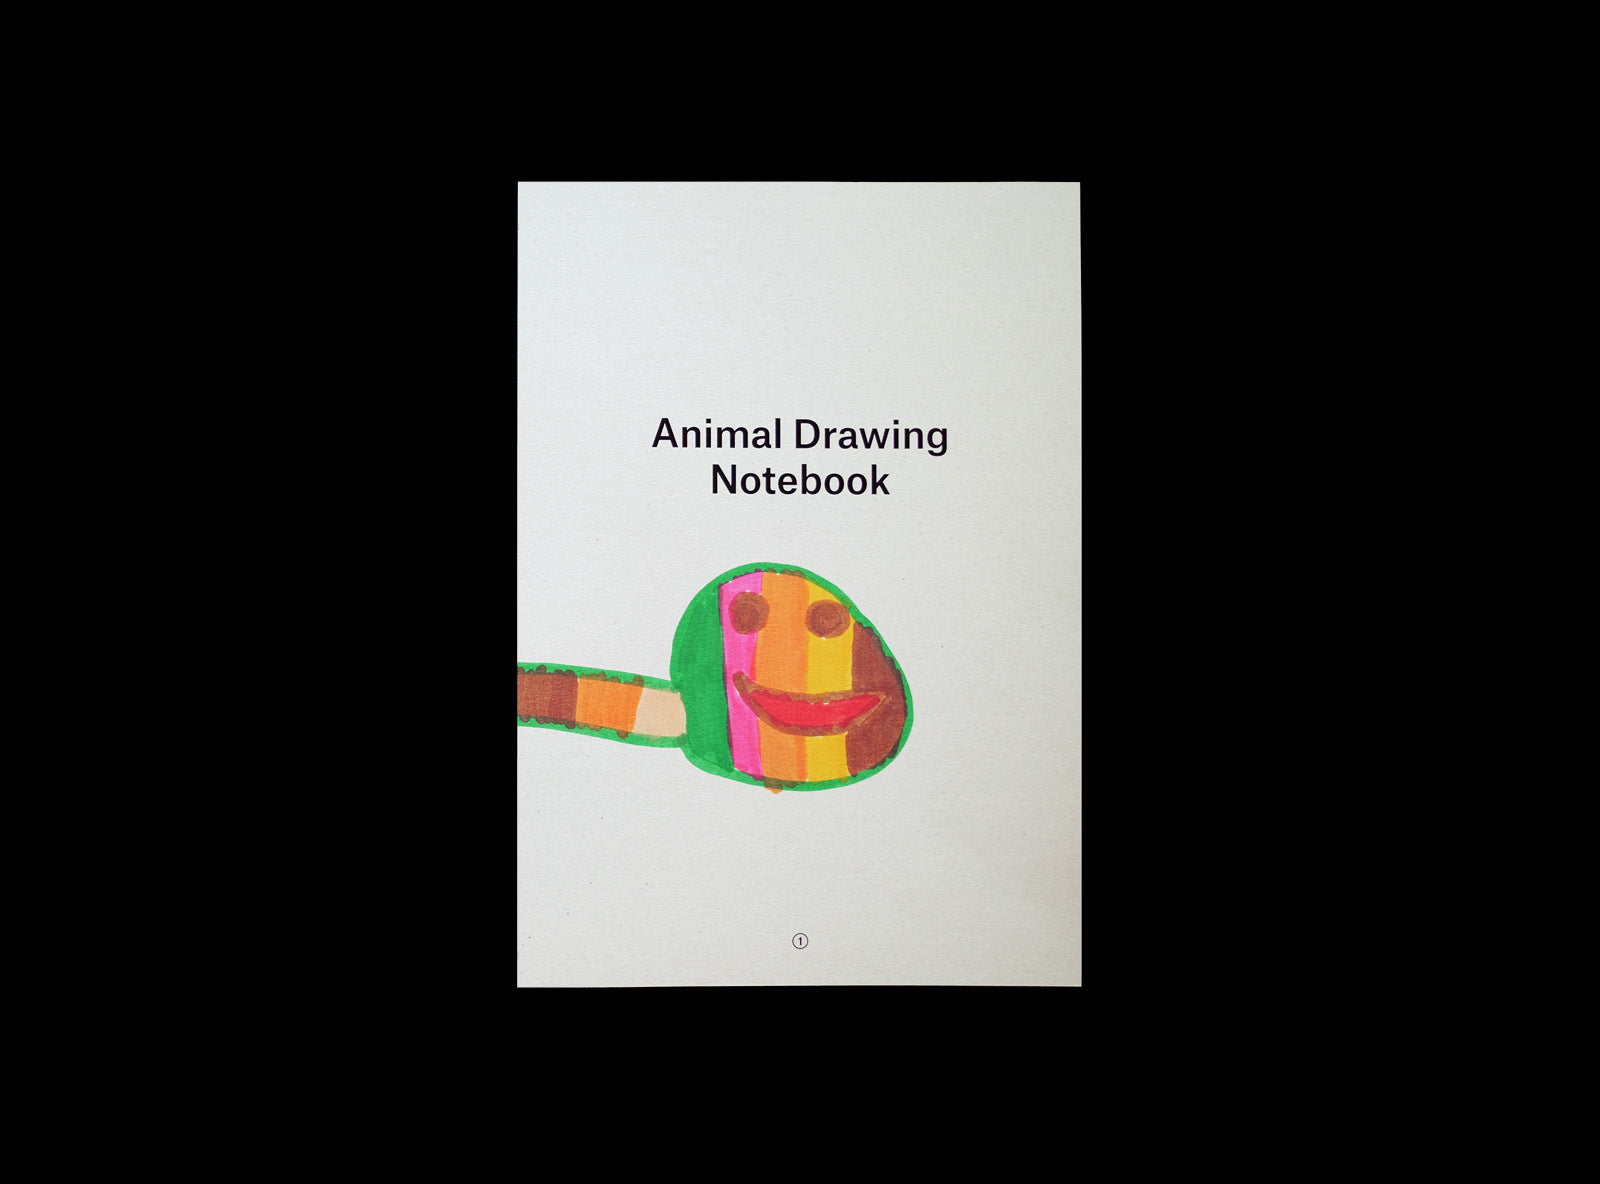 Cover of animal drawing notebook with a kid's drawing